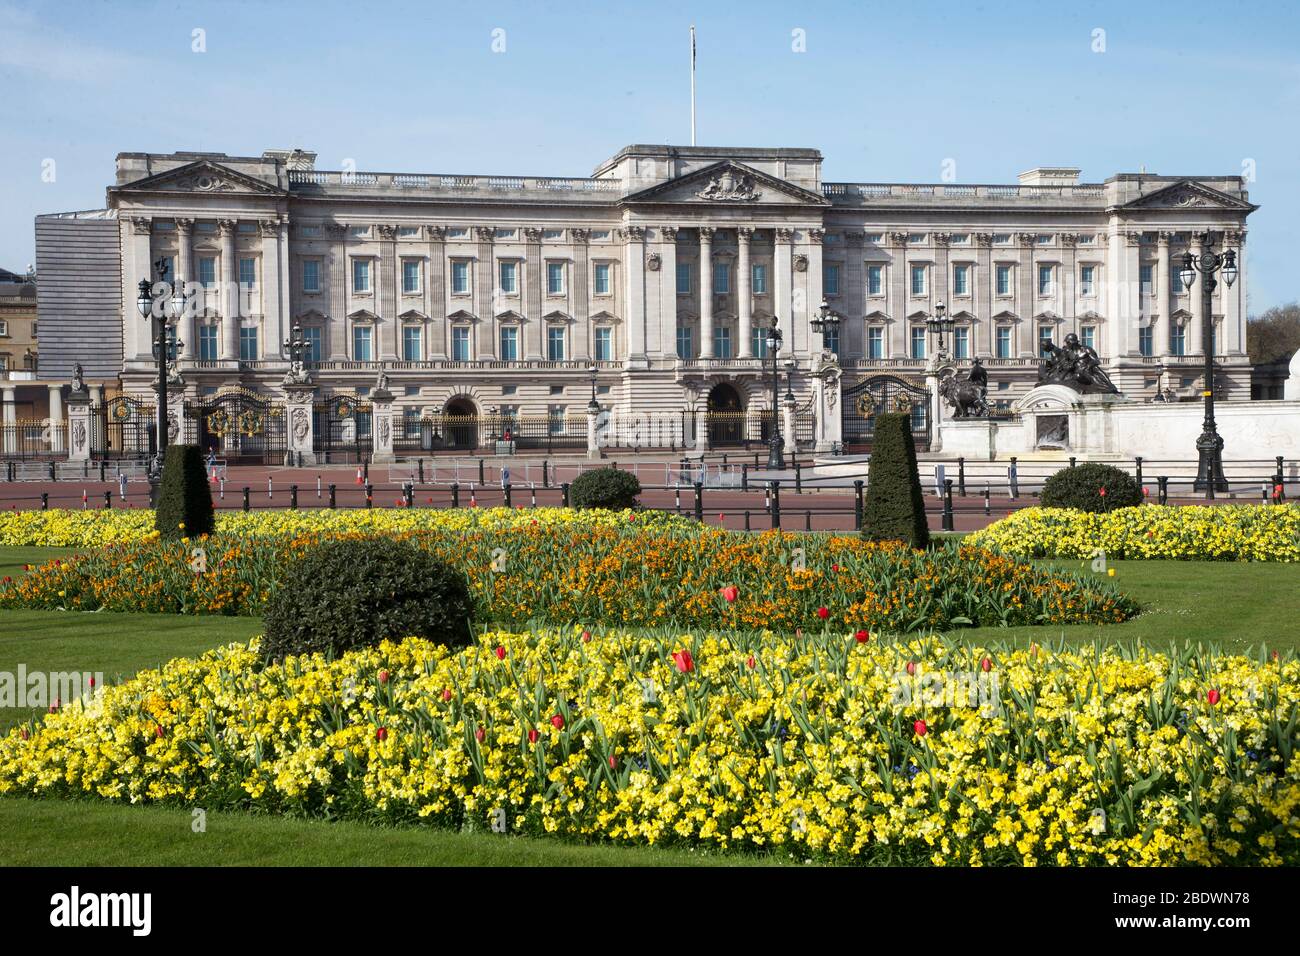 Buckingham Palace home to HM The Queen in London Stock Photo - Alamy